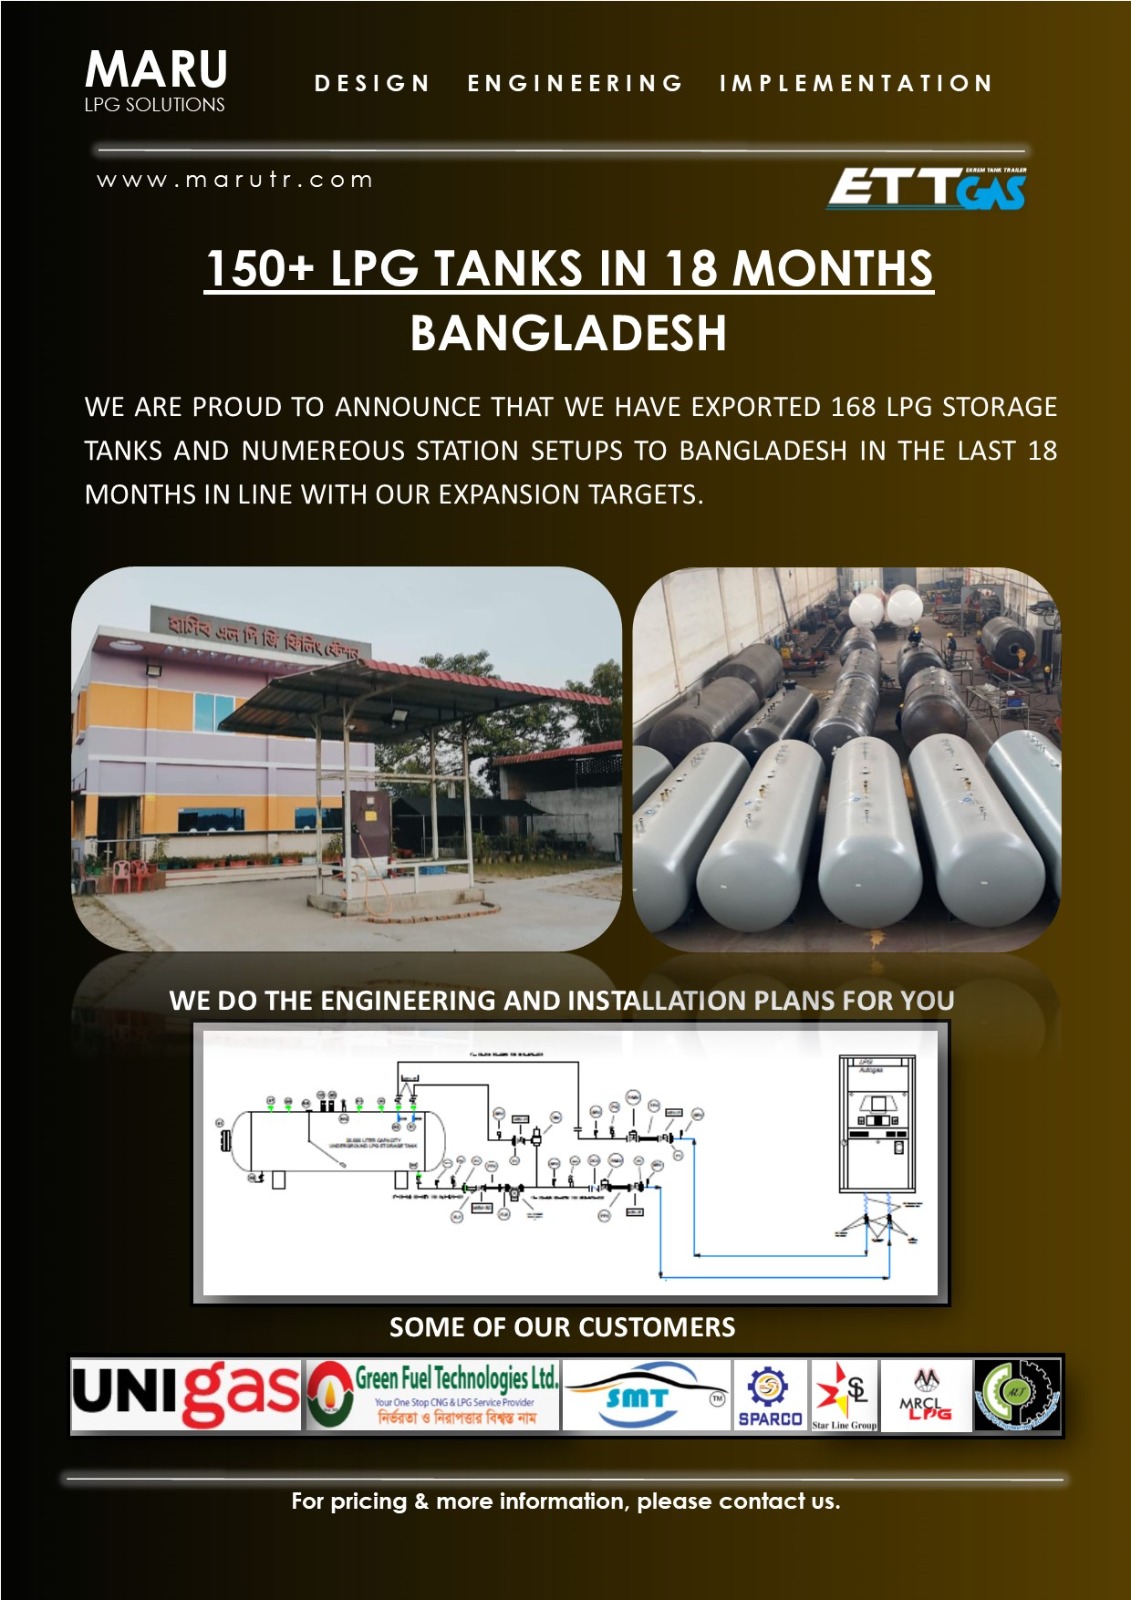 ETTGAS MARU PARTNERSHIP. We will continue to serve you. 150+ LPG TANKS IN 18 MONTHS BANGLADESH